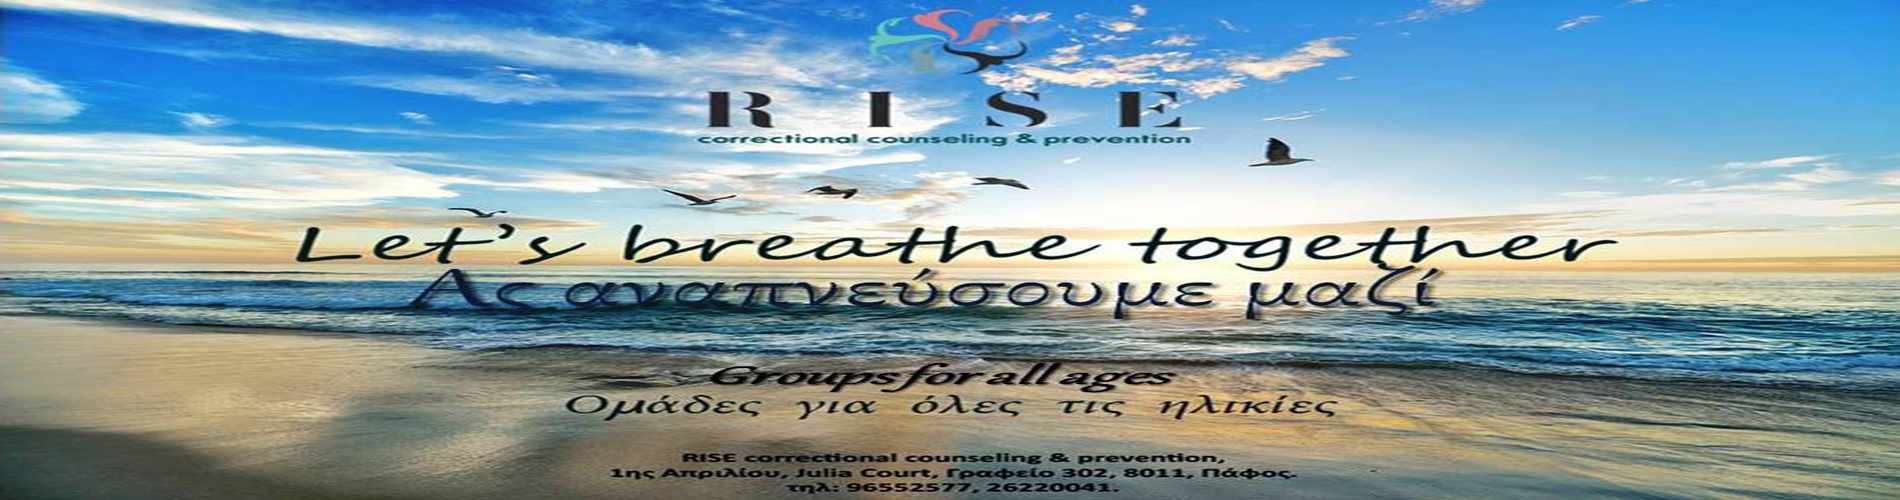 R I S E -  Correctional Counseling & Prevention